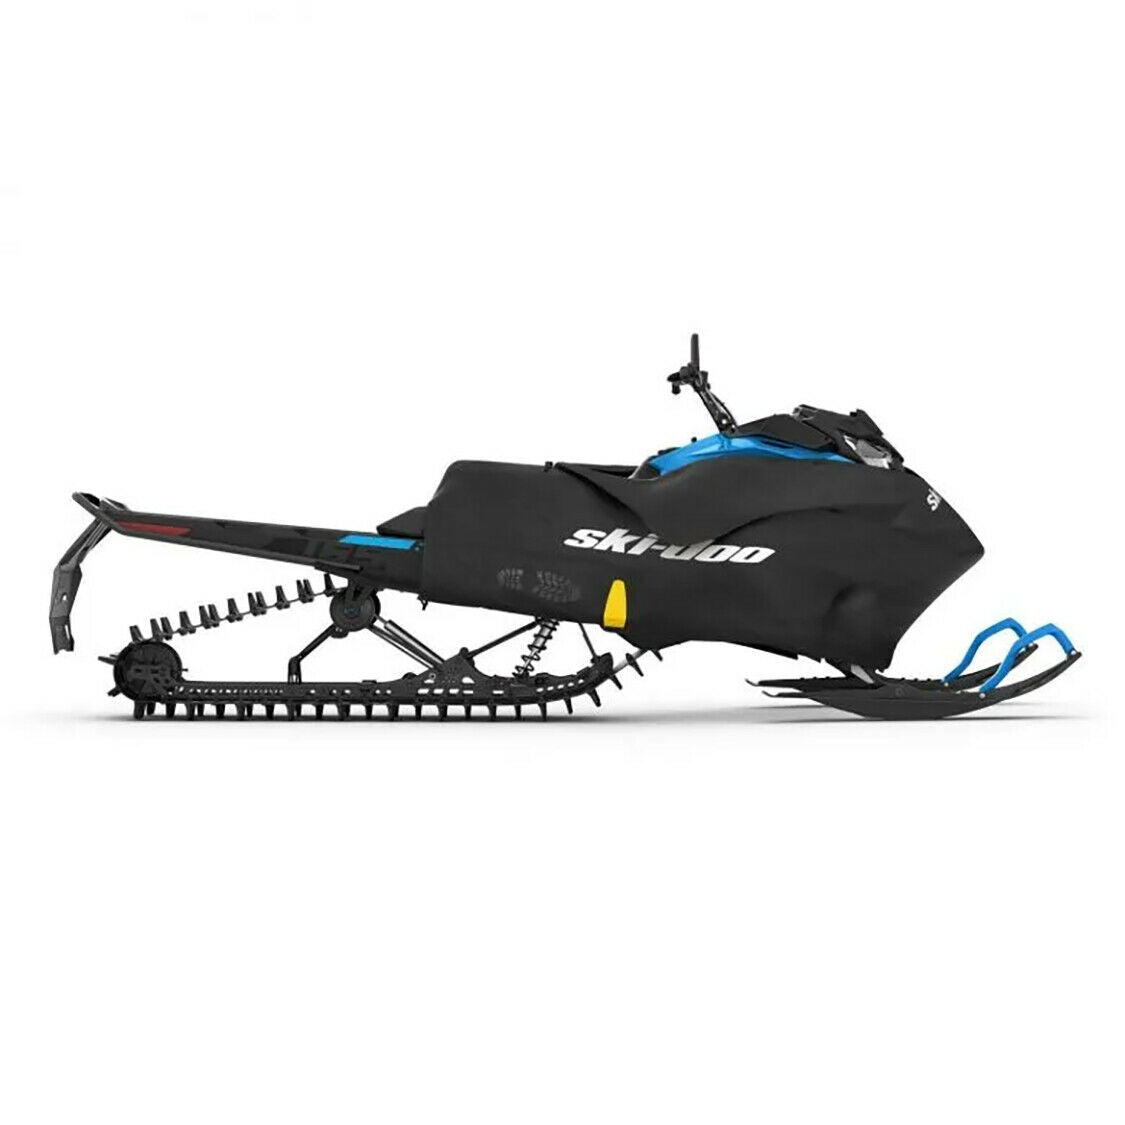 Ski-Doo Ride On Cover (ROC) System 860201909